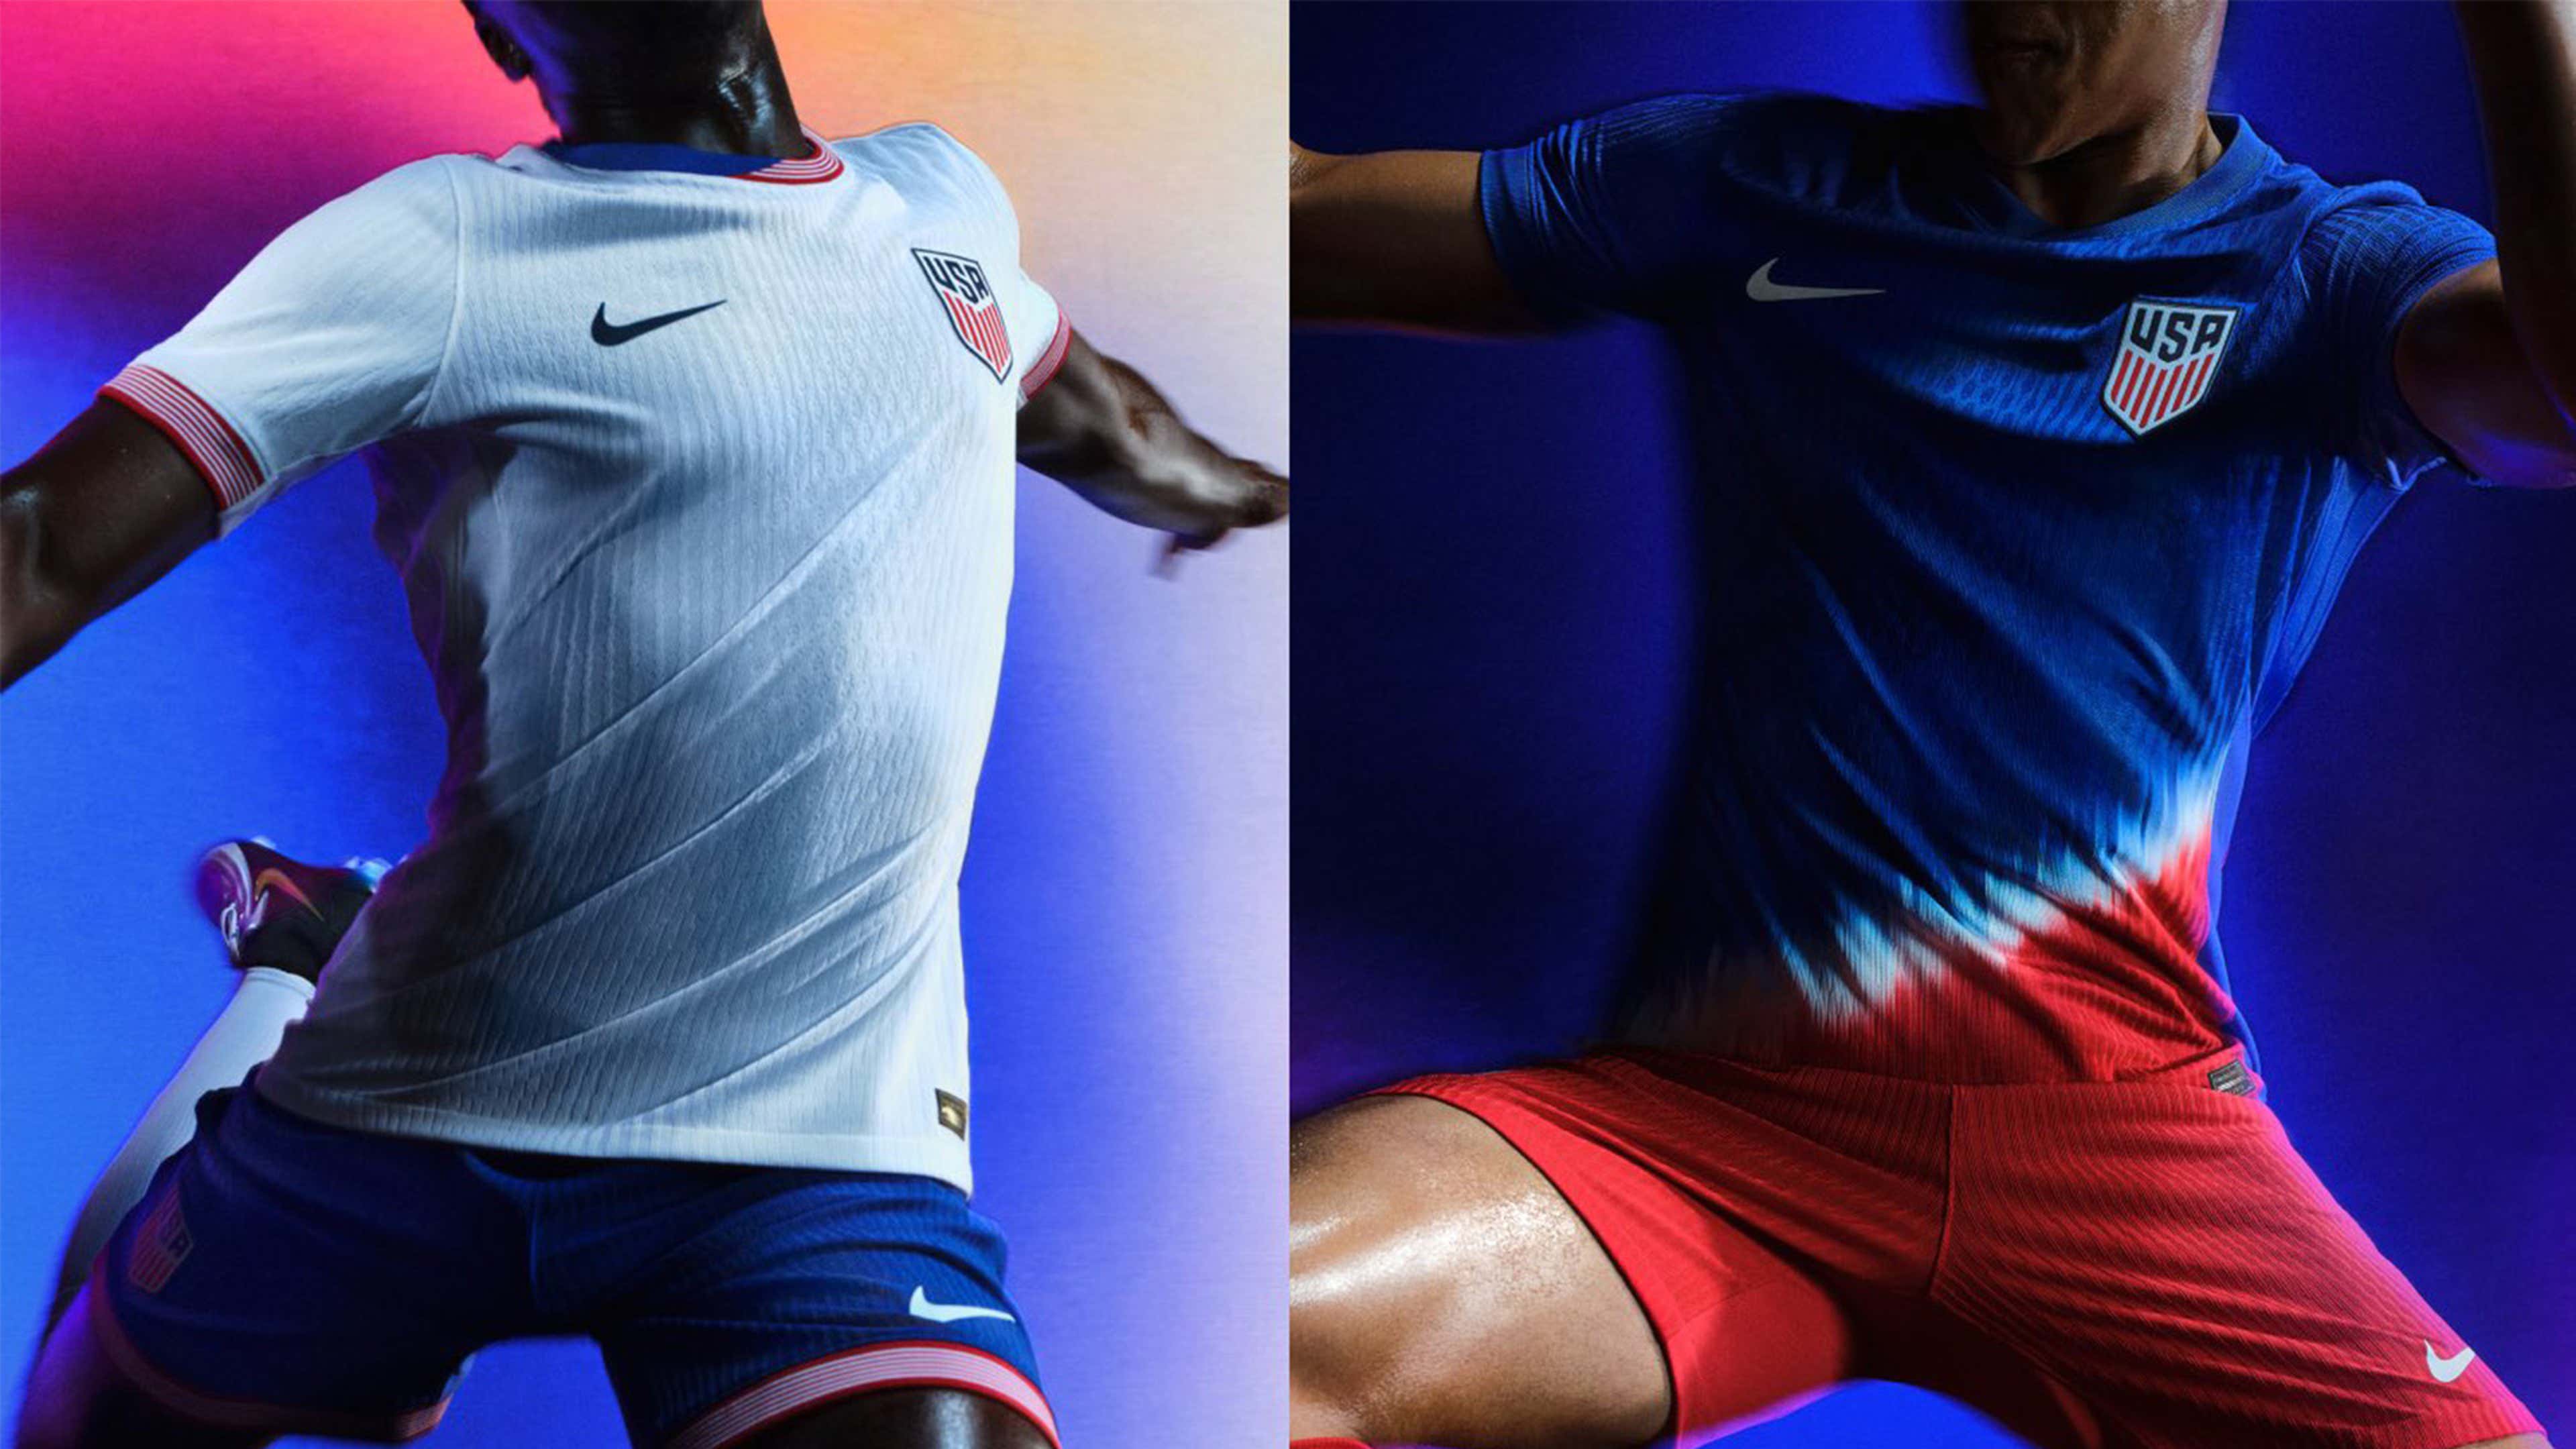 Best in a decade!' - U.S. Soccer fans hail new Nike kits for Copa